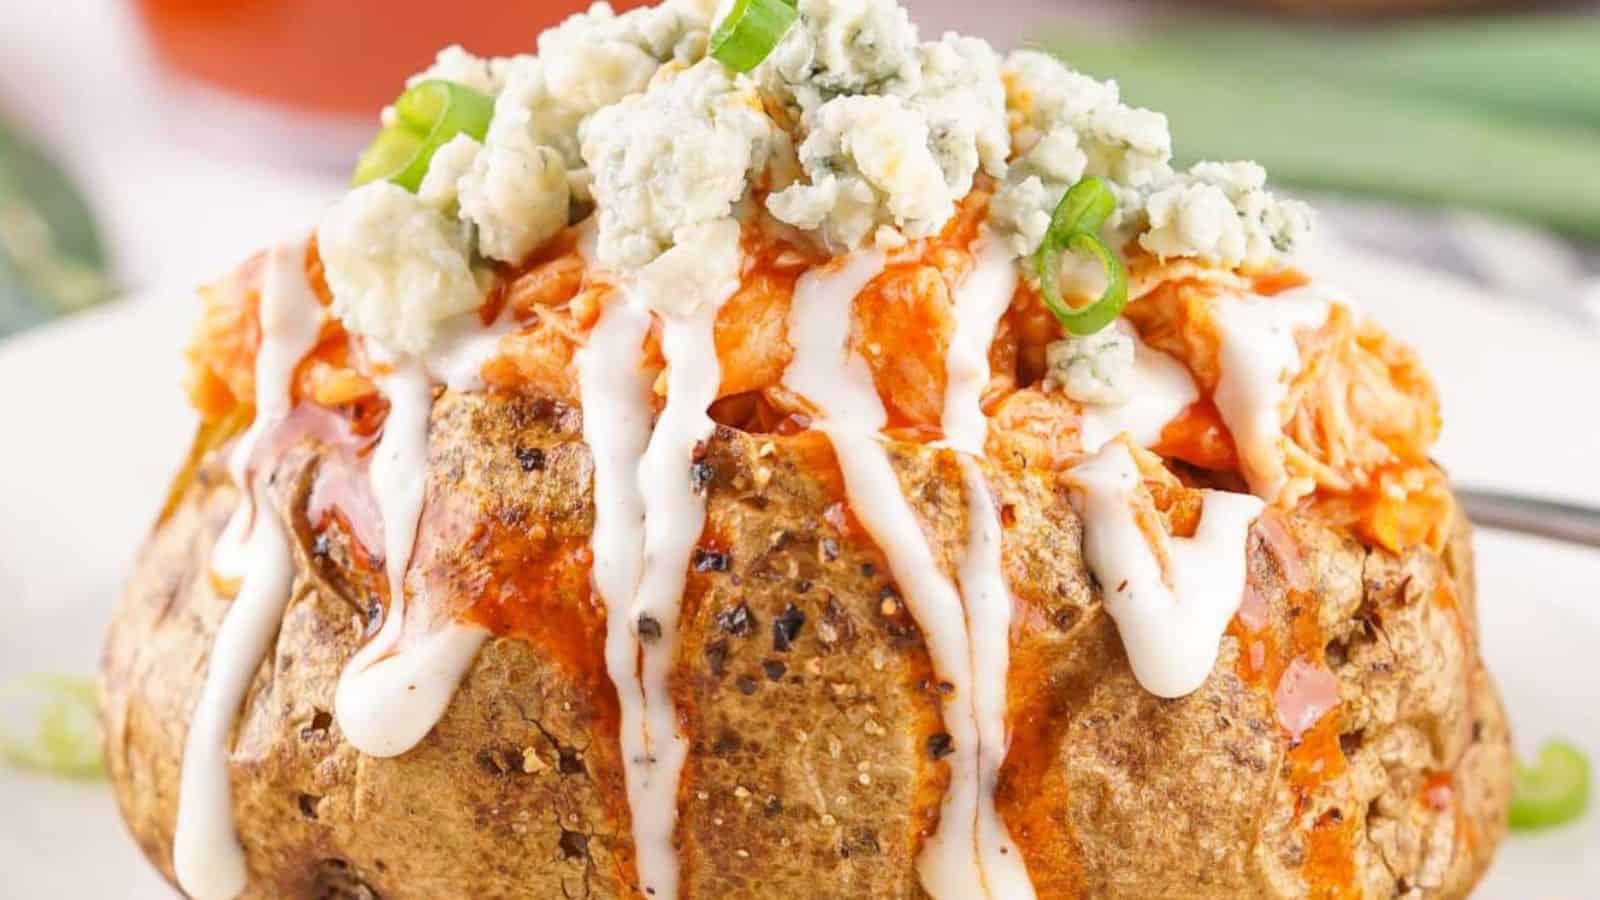 Buffalo Chicken Baked Potatoes topped with blue cheese, drizzled with ranch dressing, and garnished with green onions.